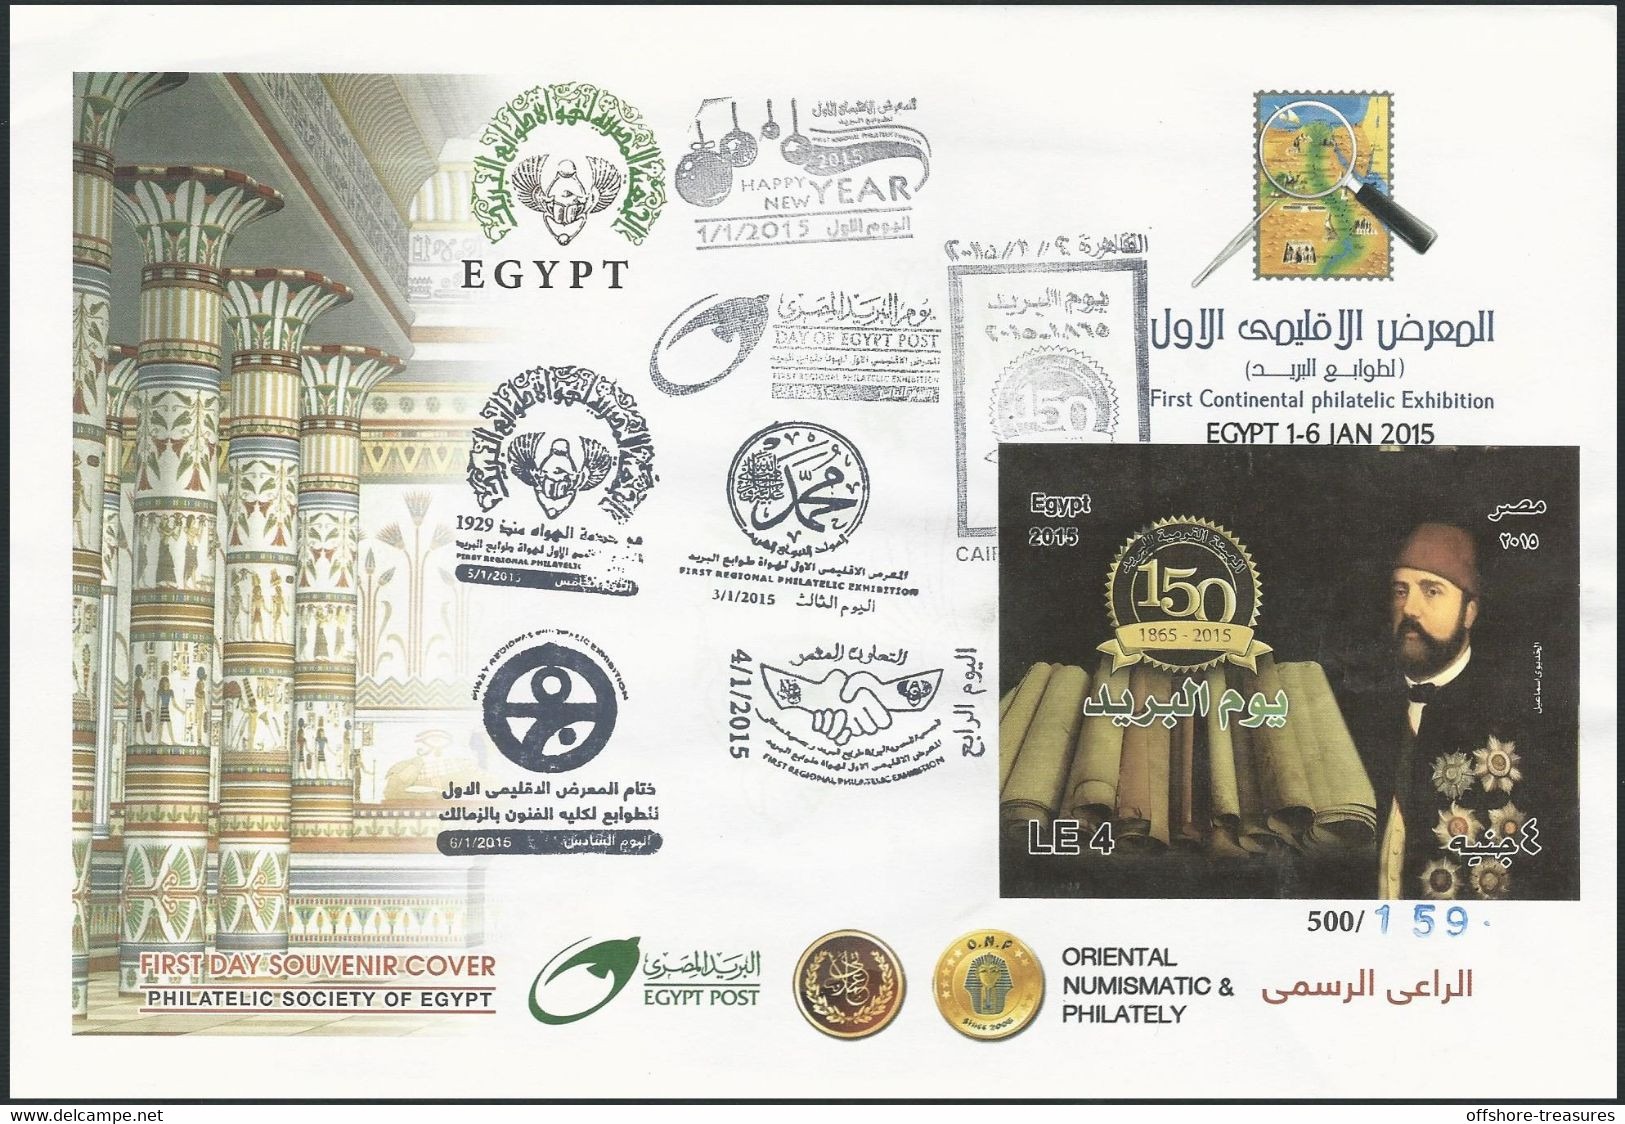 EGYPT 2015 POST DAY 2 FDC / FIRST DAY COVER Limited Edition Certified - ALL POSTAL EXHIBITION 6 DAYS Cachets 159/500 - Storia Postale